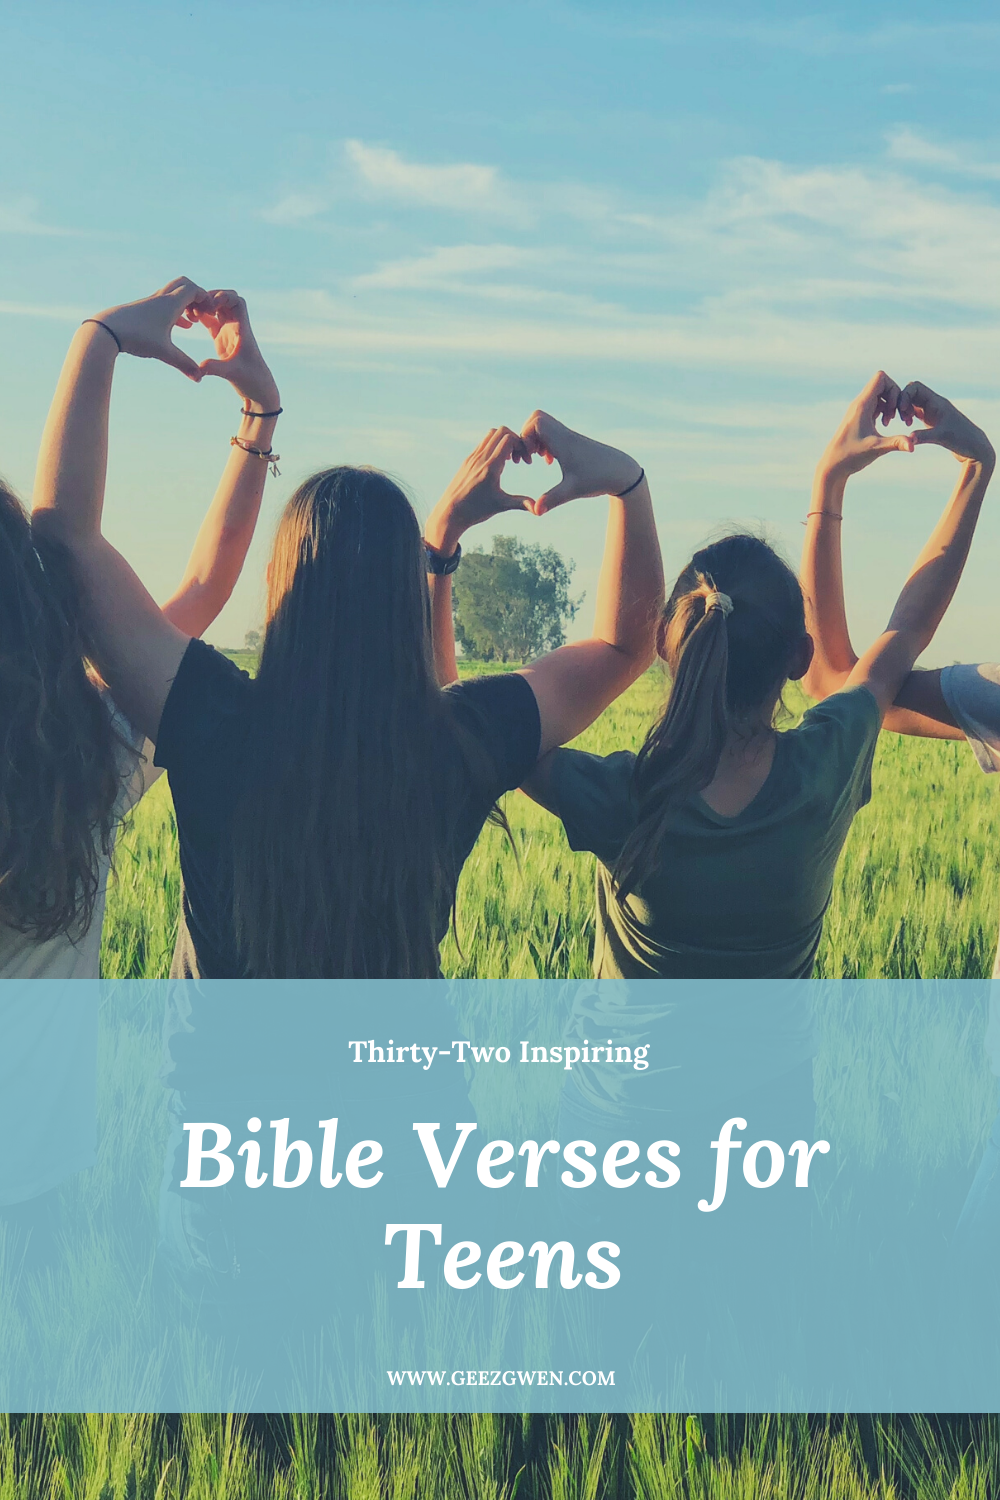 Inspiring Bible Verses for Teens with a Printable List to share.